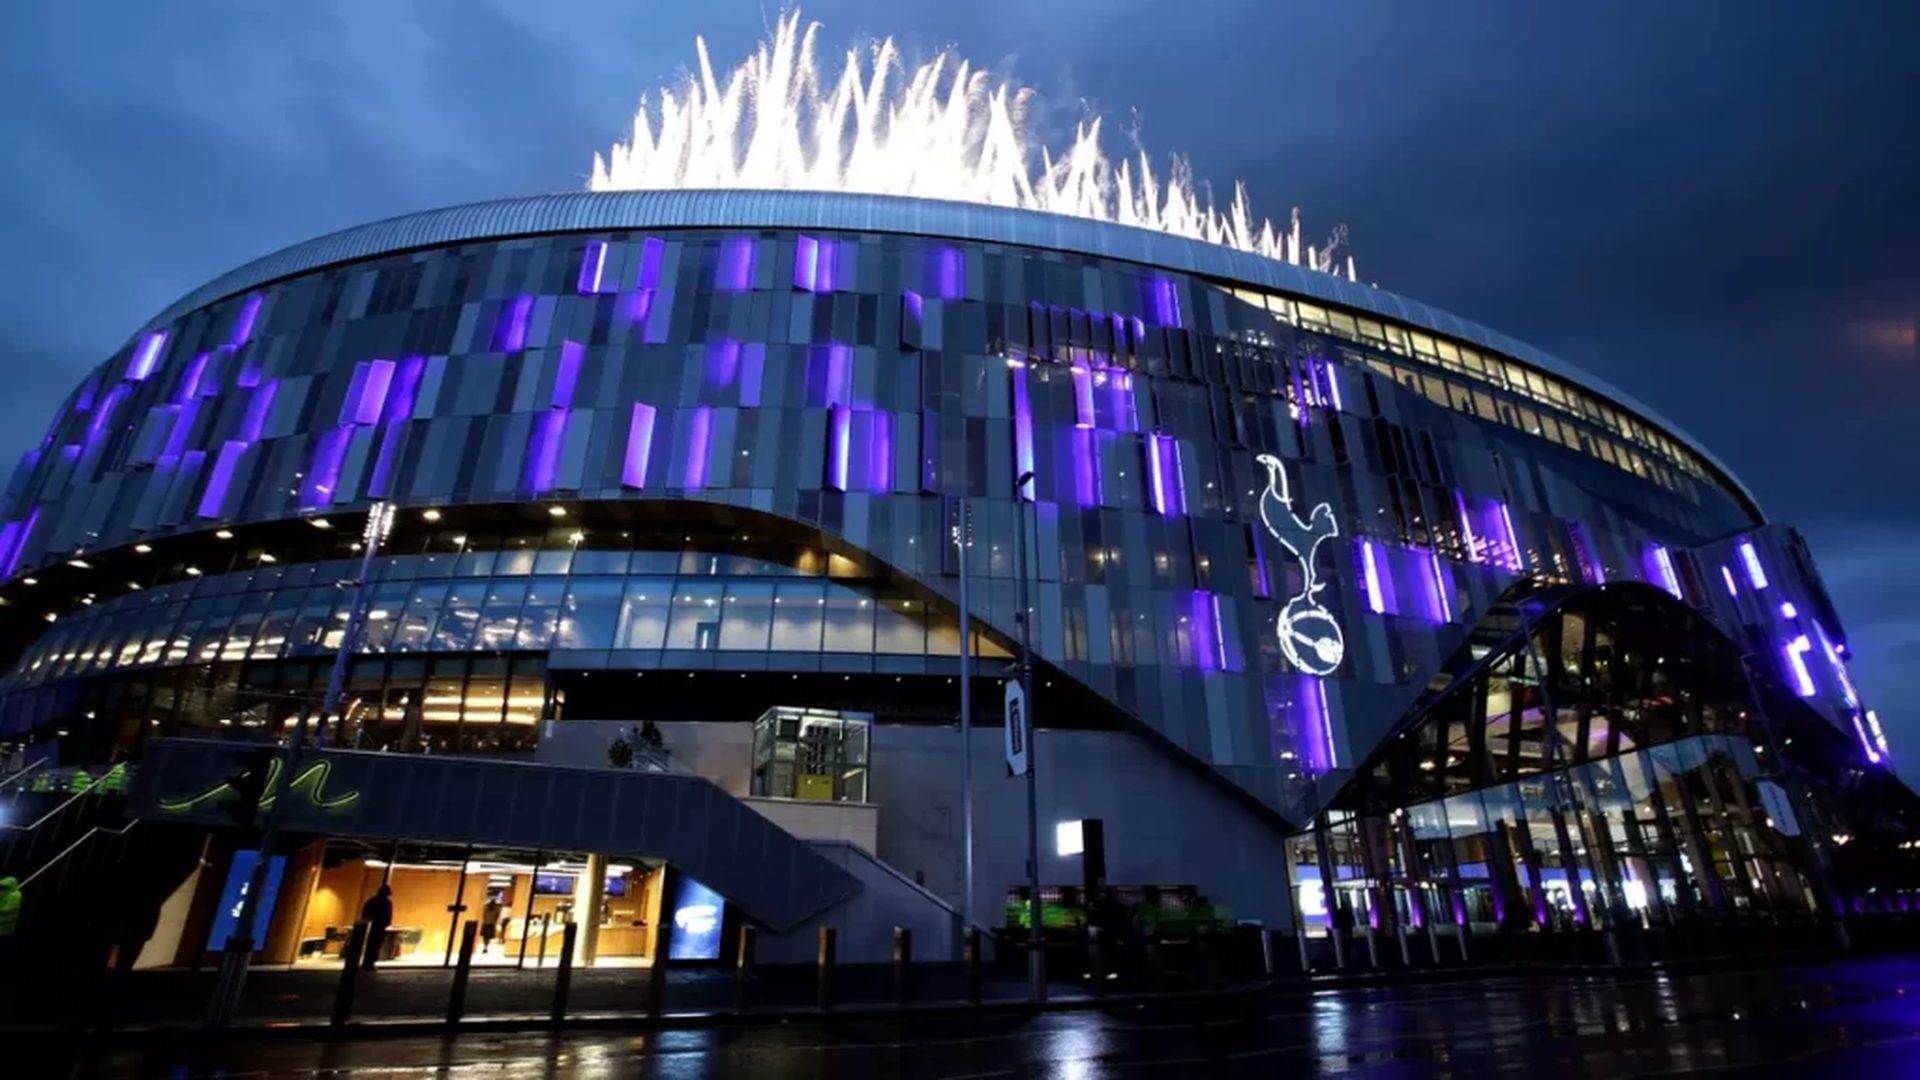 Google in talks with Tottenham for Over £1bn stadium naming rights deal